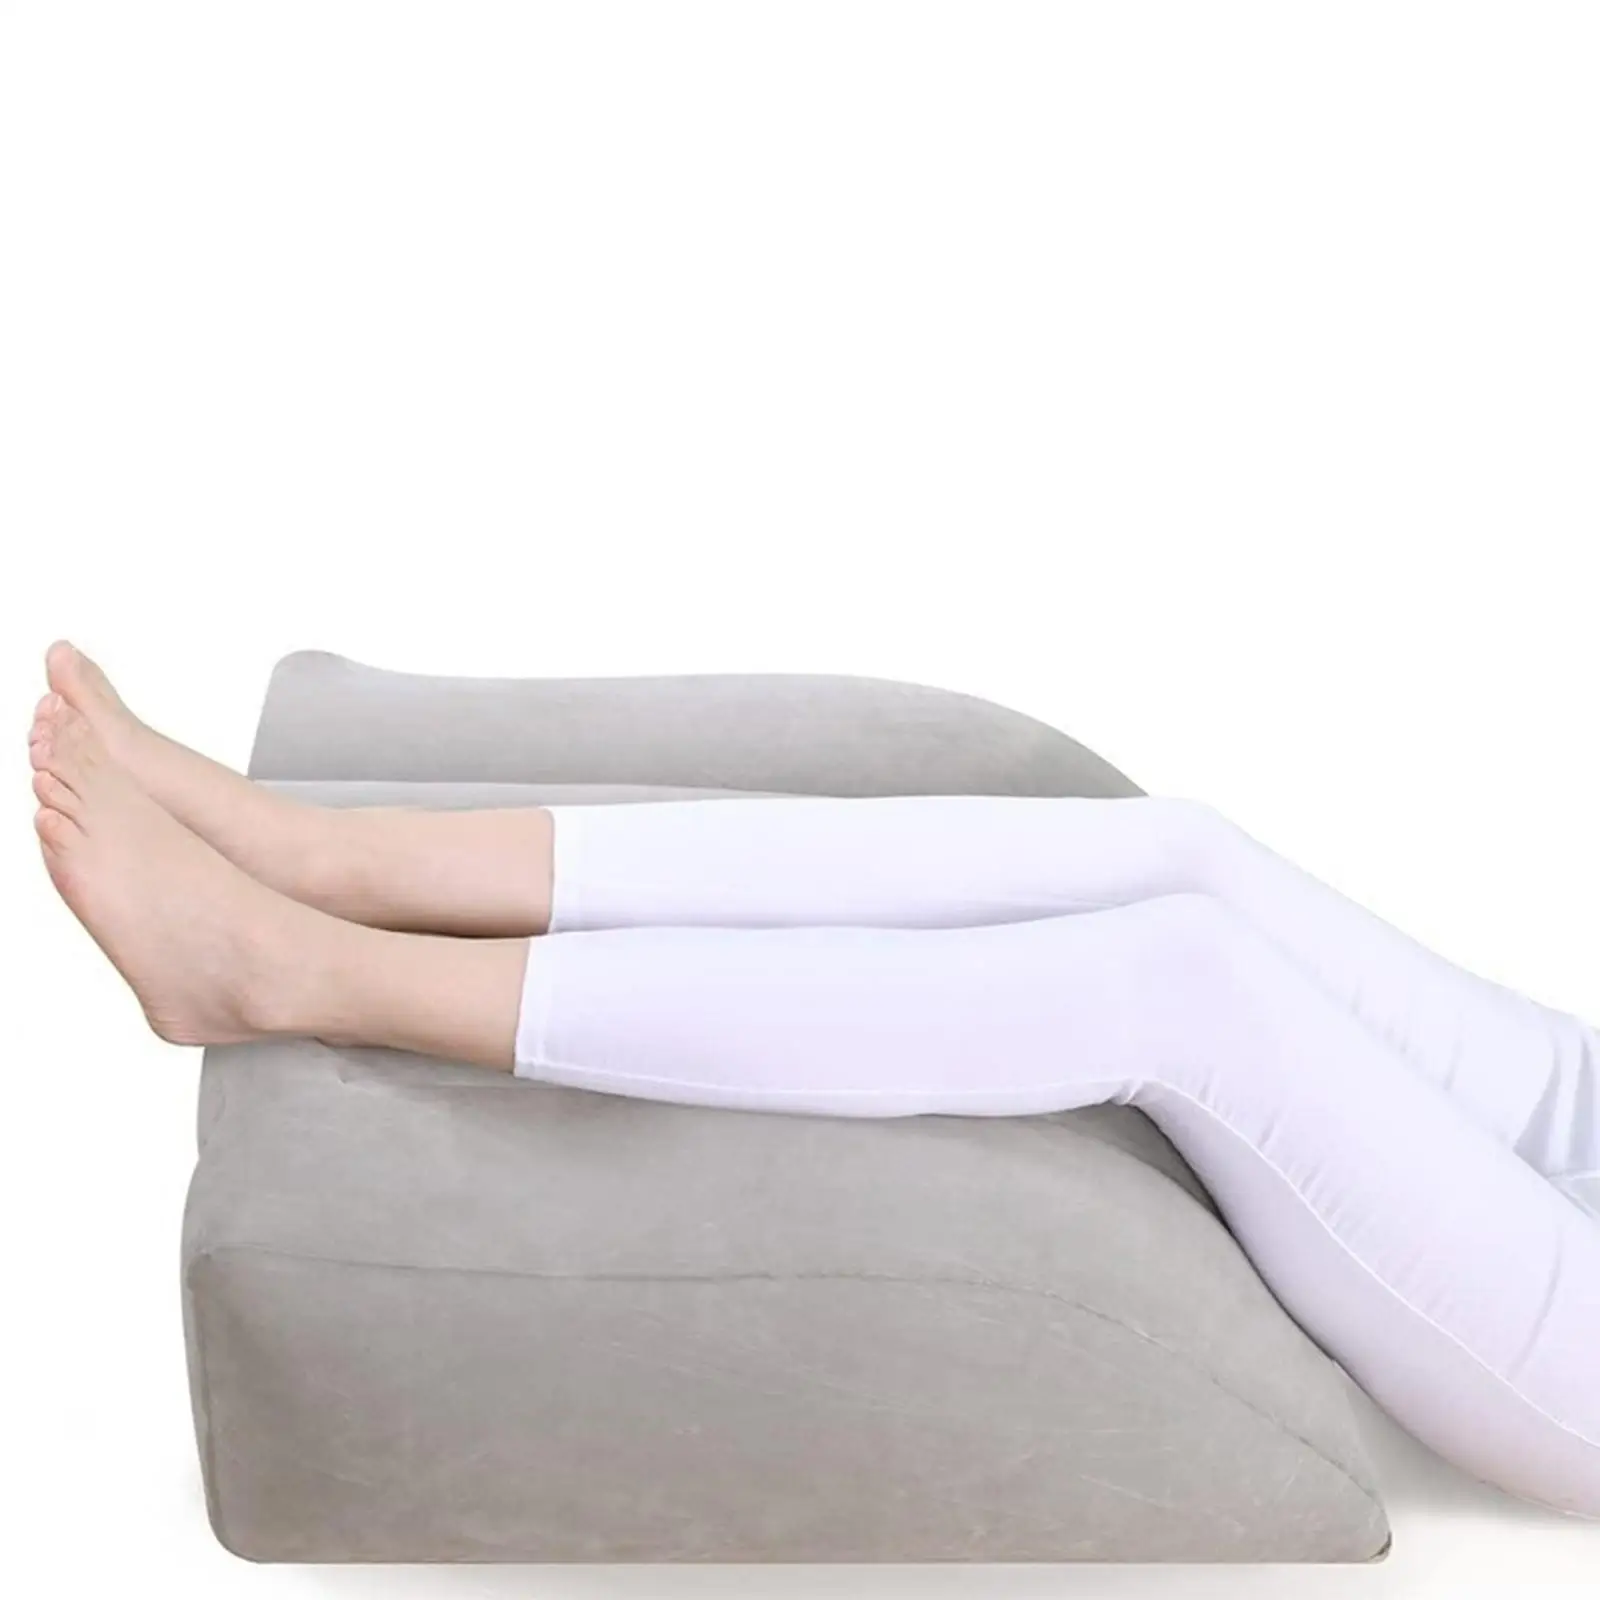 Leg Elevation Pillow, Inflatable Leg Rest Pillow Elevating for Sleeping Reading